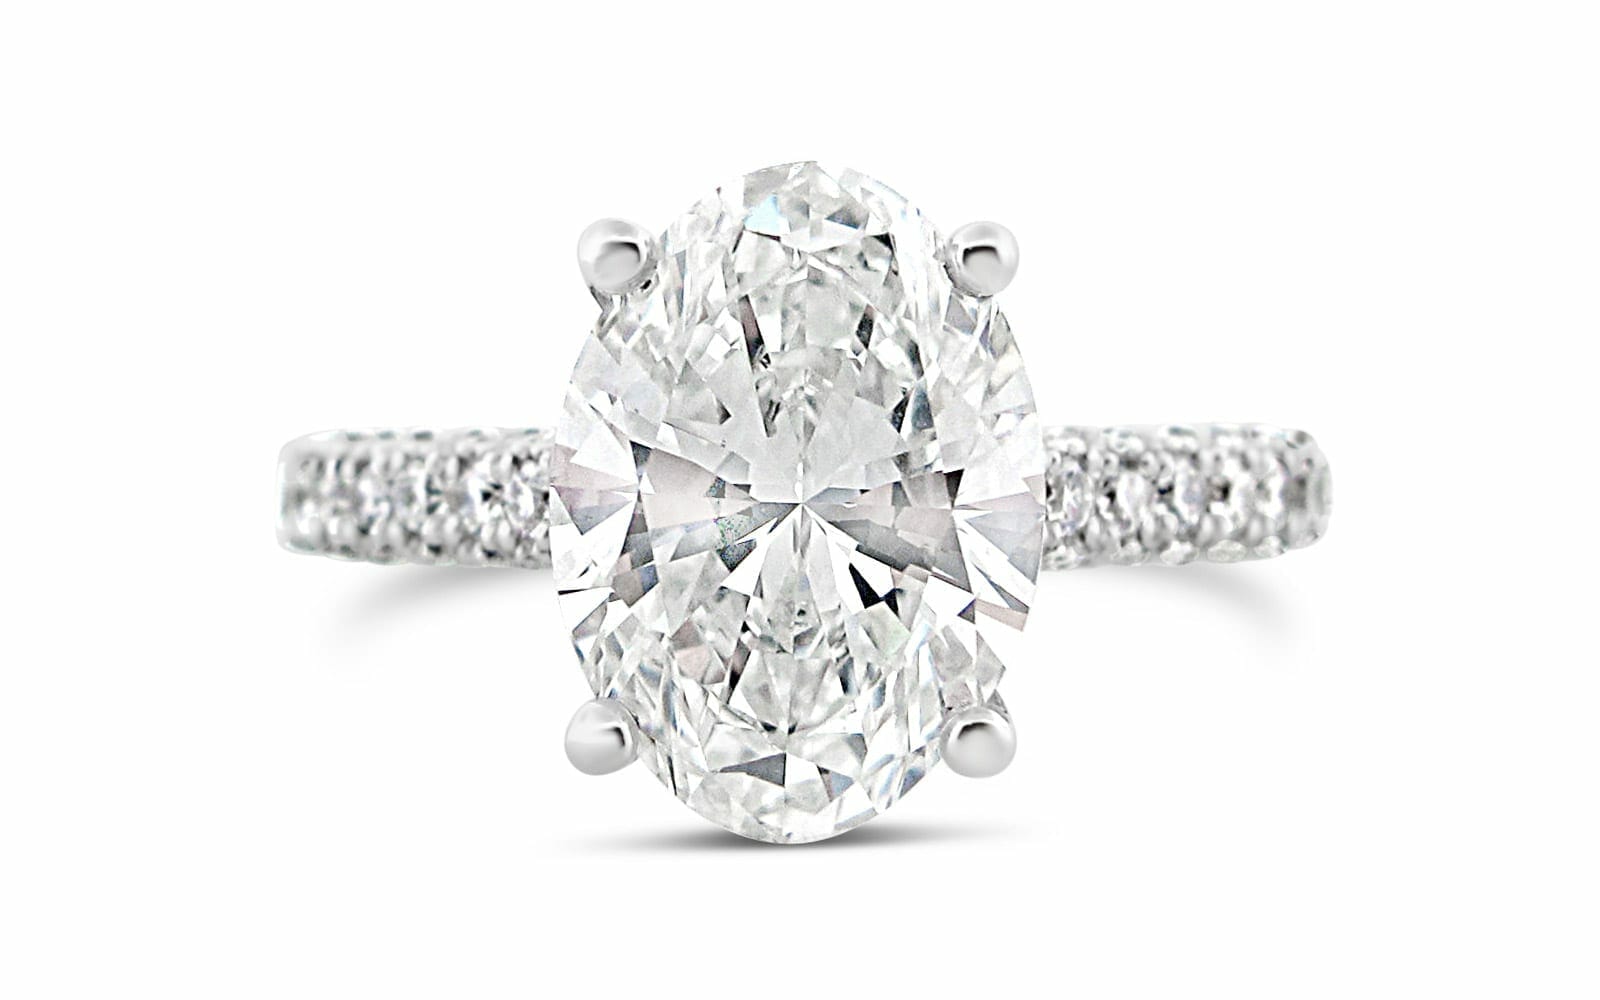 A diamond engagement ring with an oval cut center stone on the setting with smaller diamonds around the band.